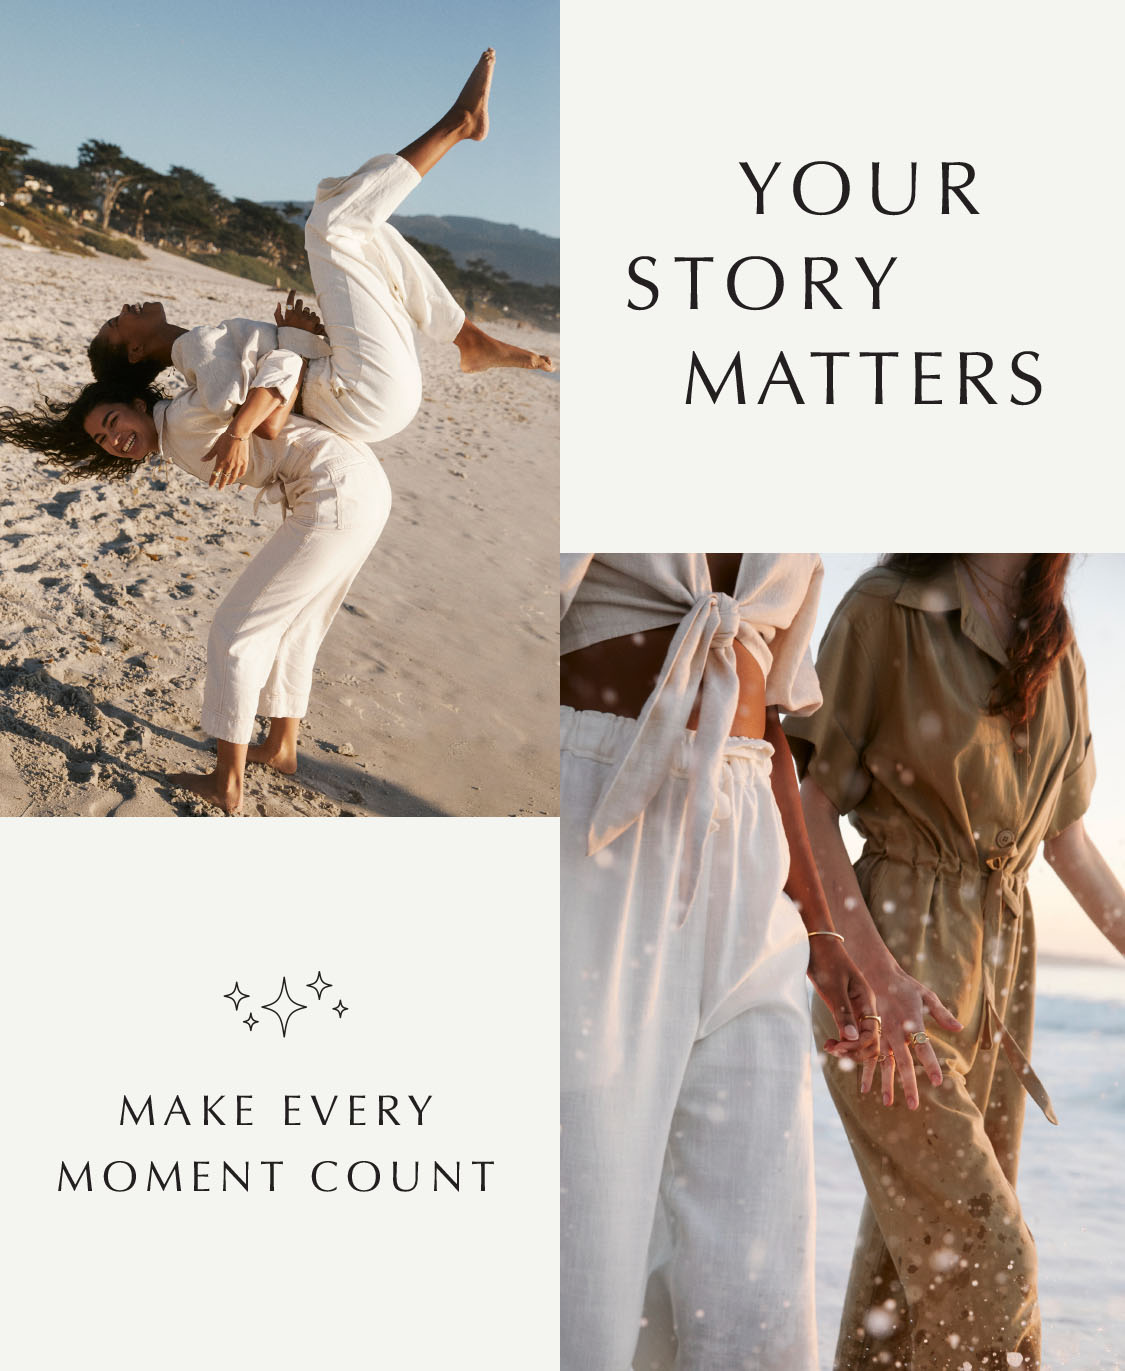 Collage - Your story matters, make every moment count